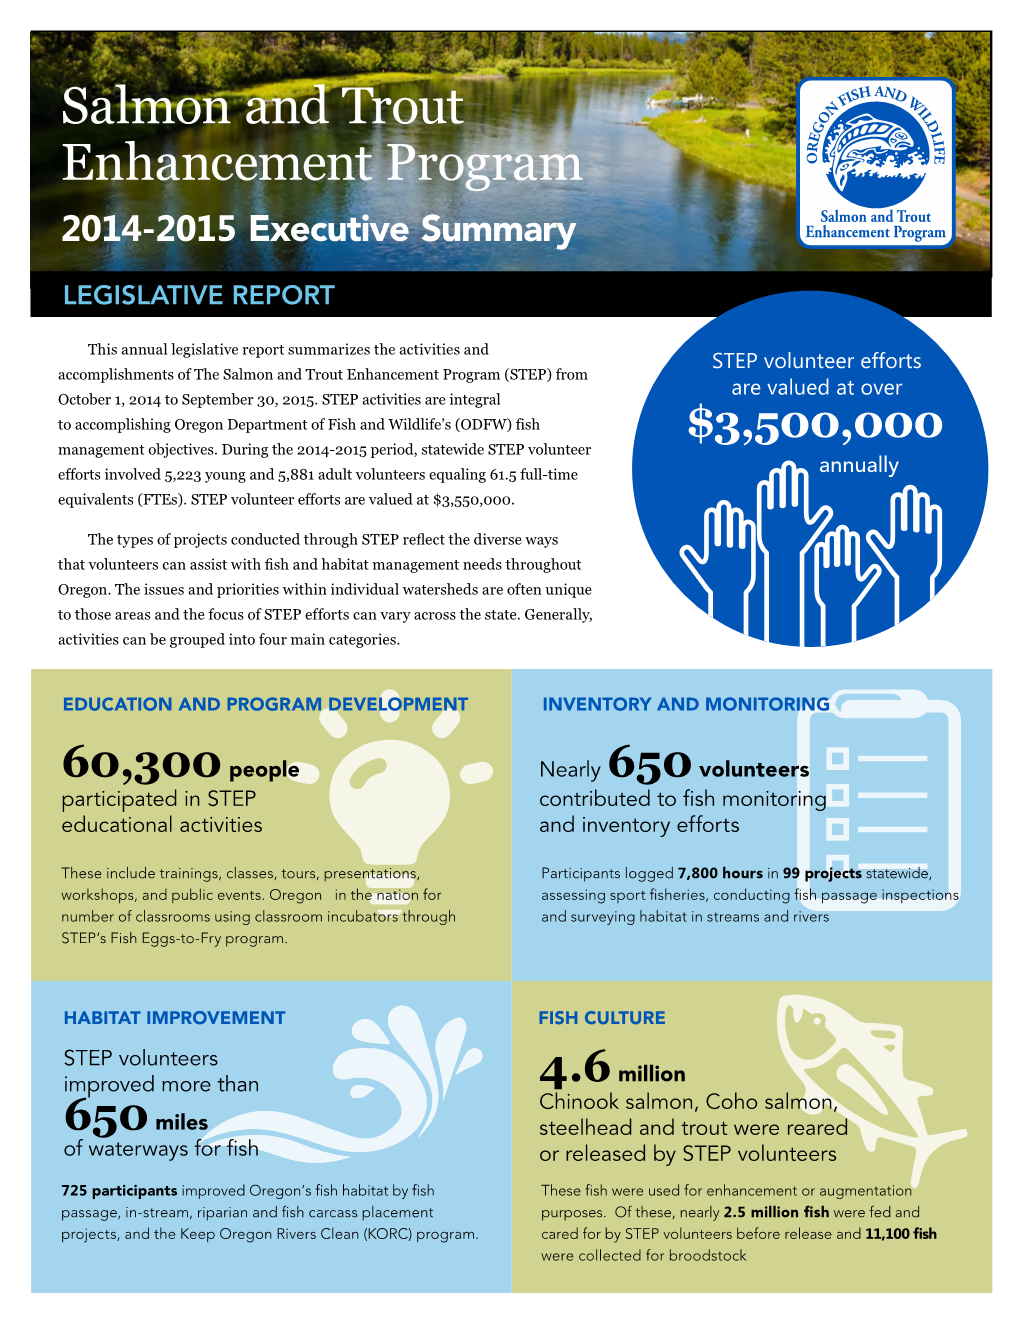 Salmon and Trout Enhancement Program 2014-2015 Executive Summary